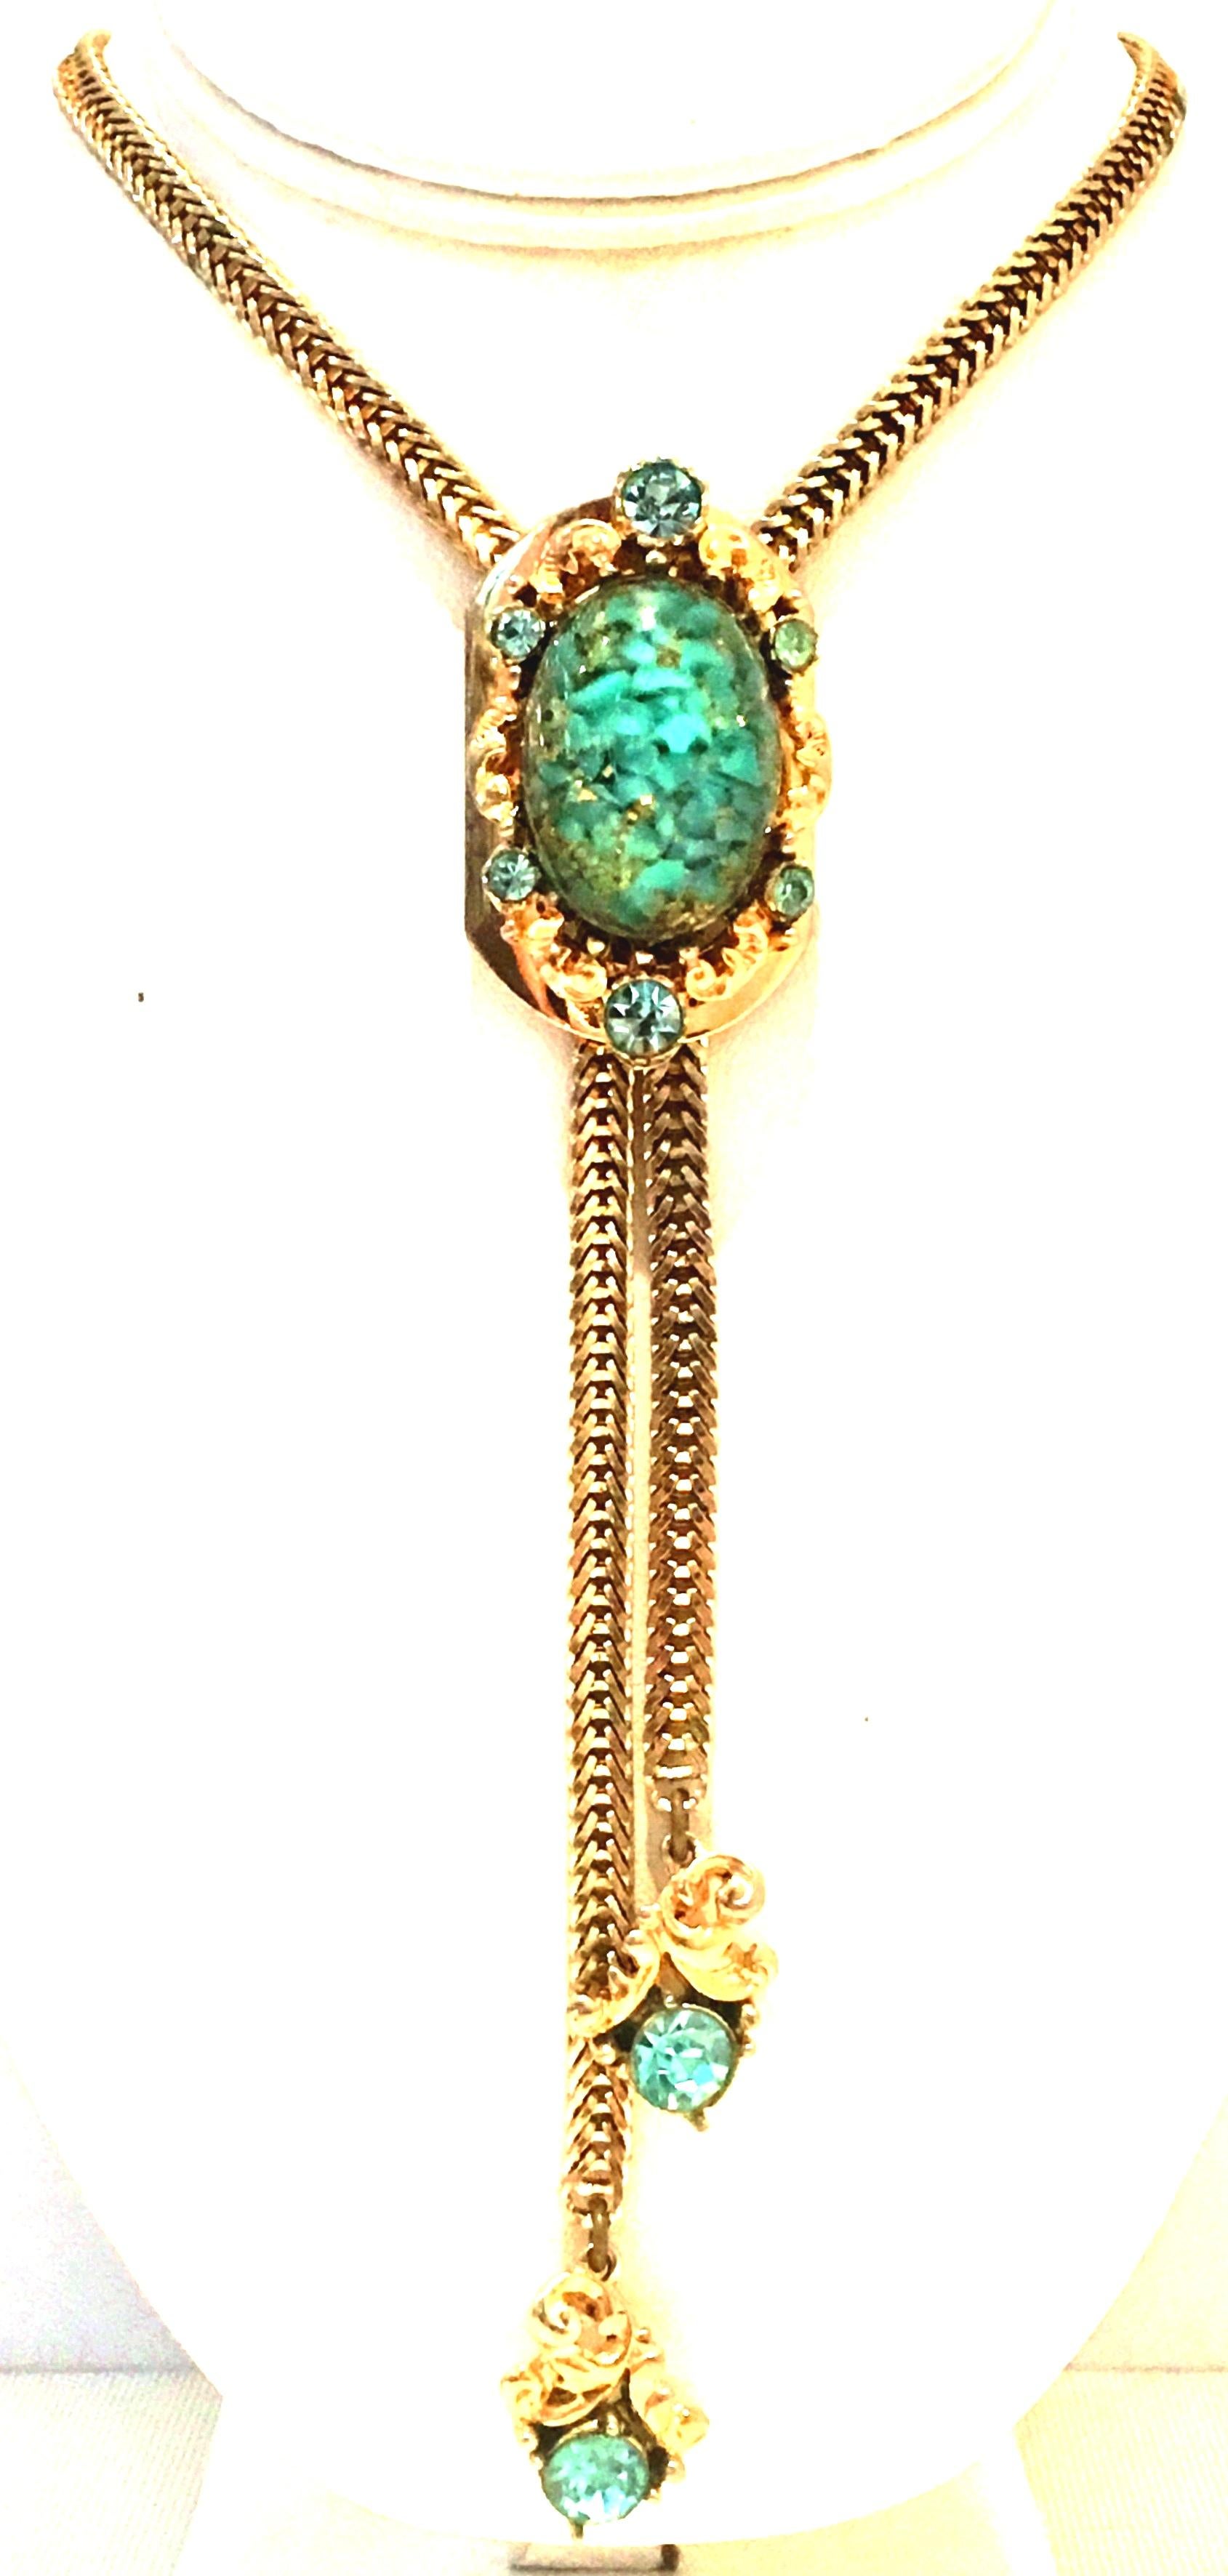 1950'S Gold Plate, Lucite 22K Gold Fleck & Austrian Crystal  Adjustable Bolo Style Necklace Attributed to Selro. Features a central aqua oval polished cabochon cased Lucite with 22-K Gold Fleck detail stone, aqua marine cut and faceted Austrian